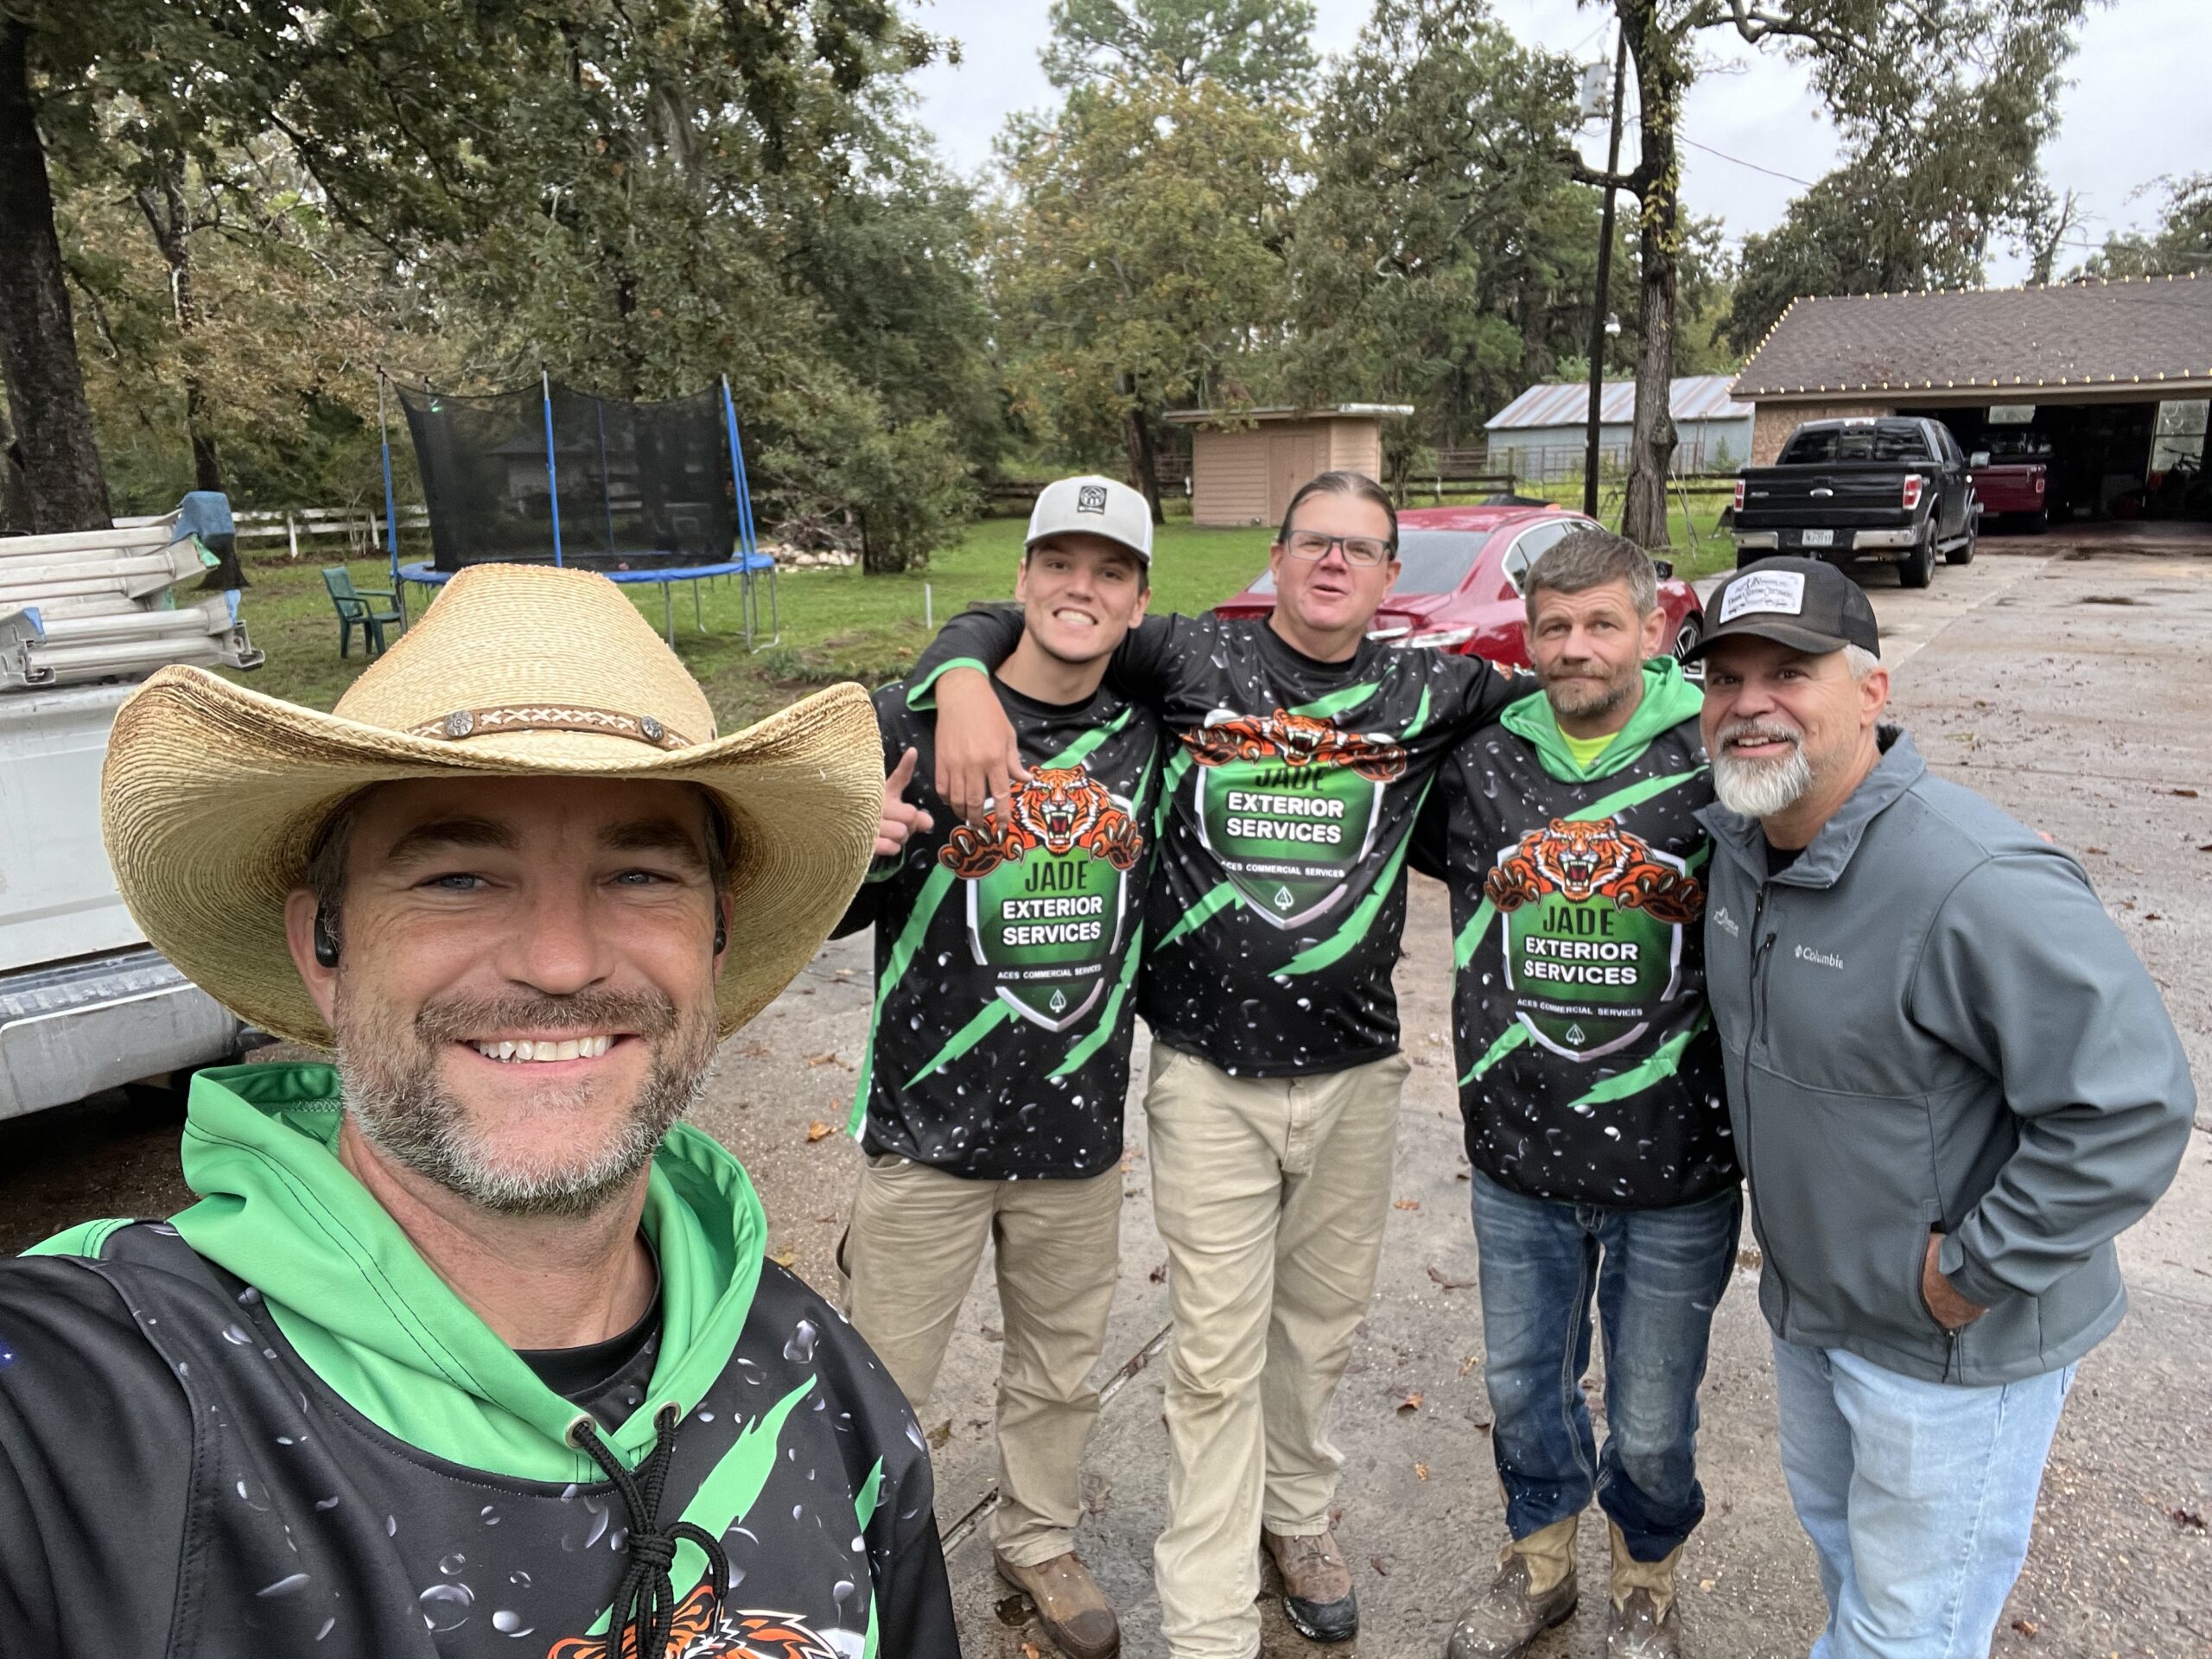 Pressure Washing Team Photo in The Woodlands